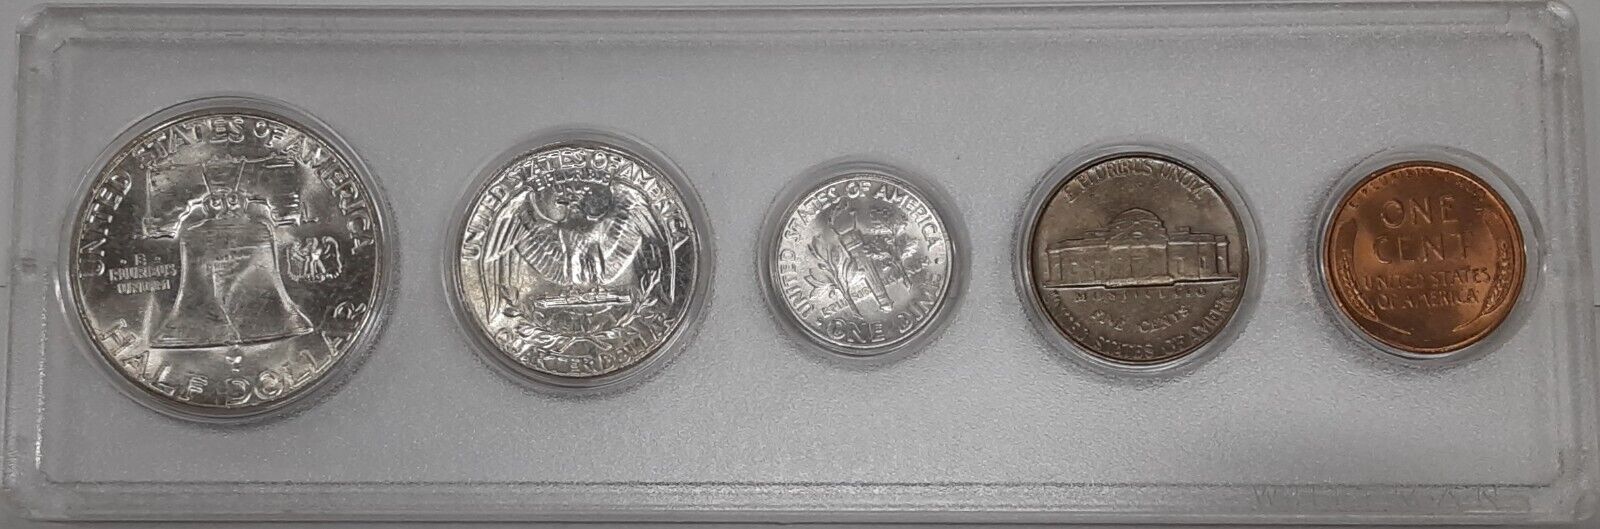 1958 US Mint Set - 5 Uncirculated Coins in Whitman Plastic Holder